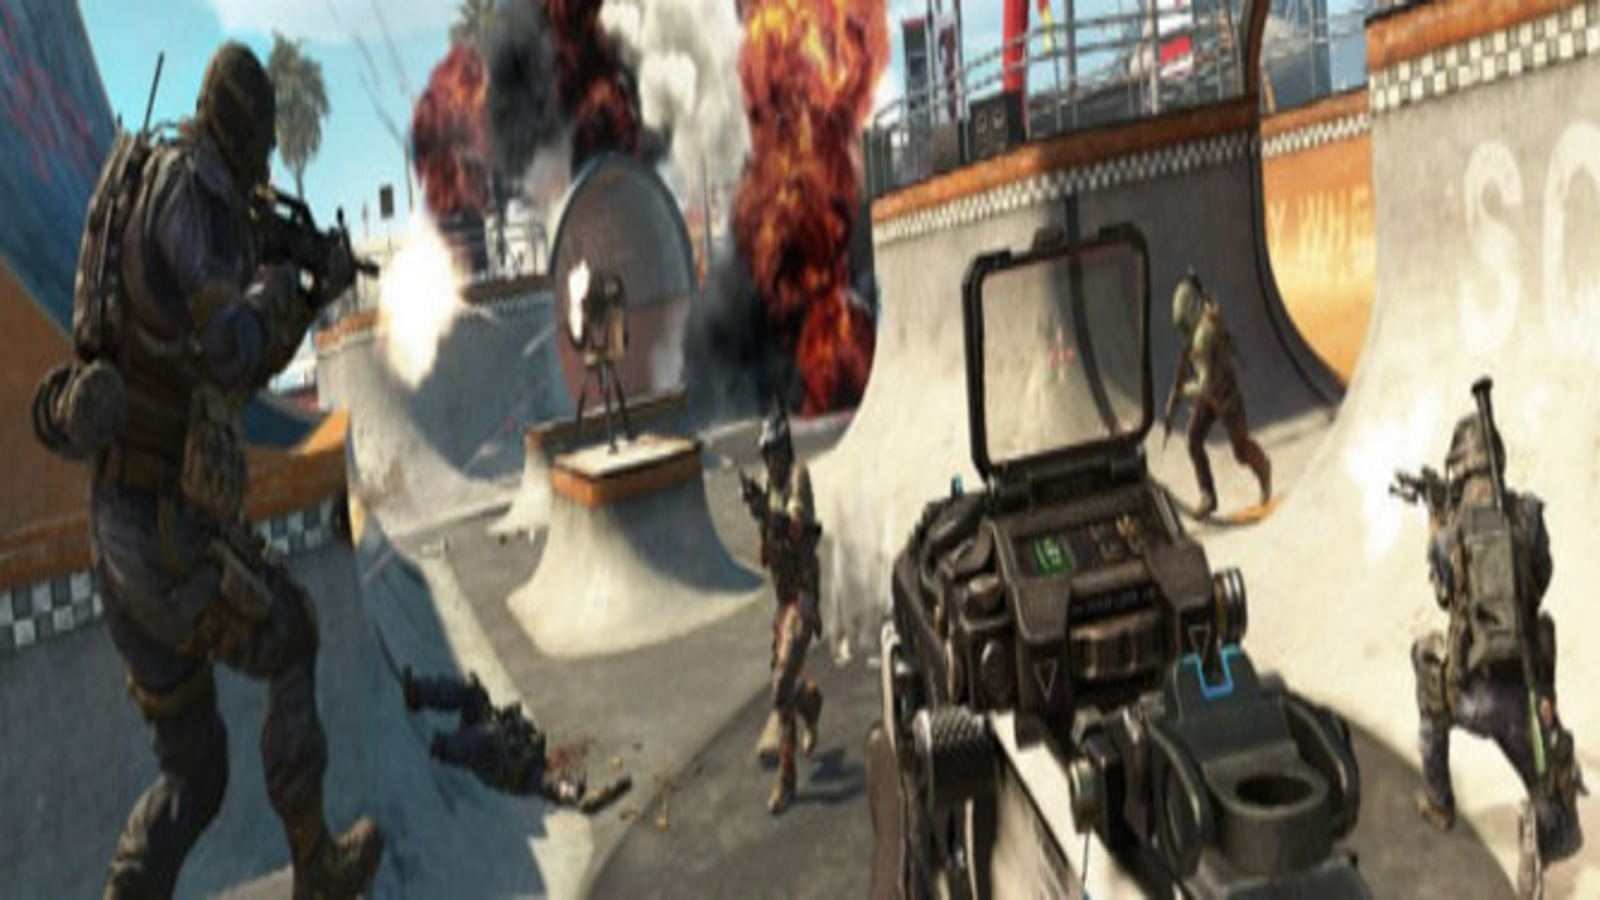 black ops 2 png